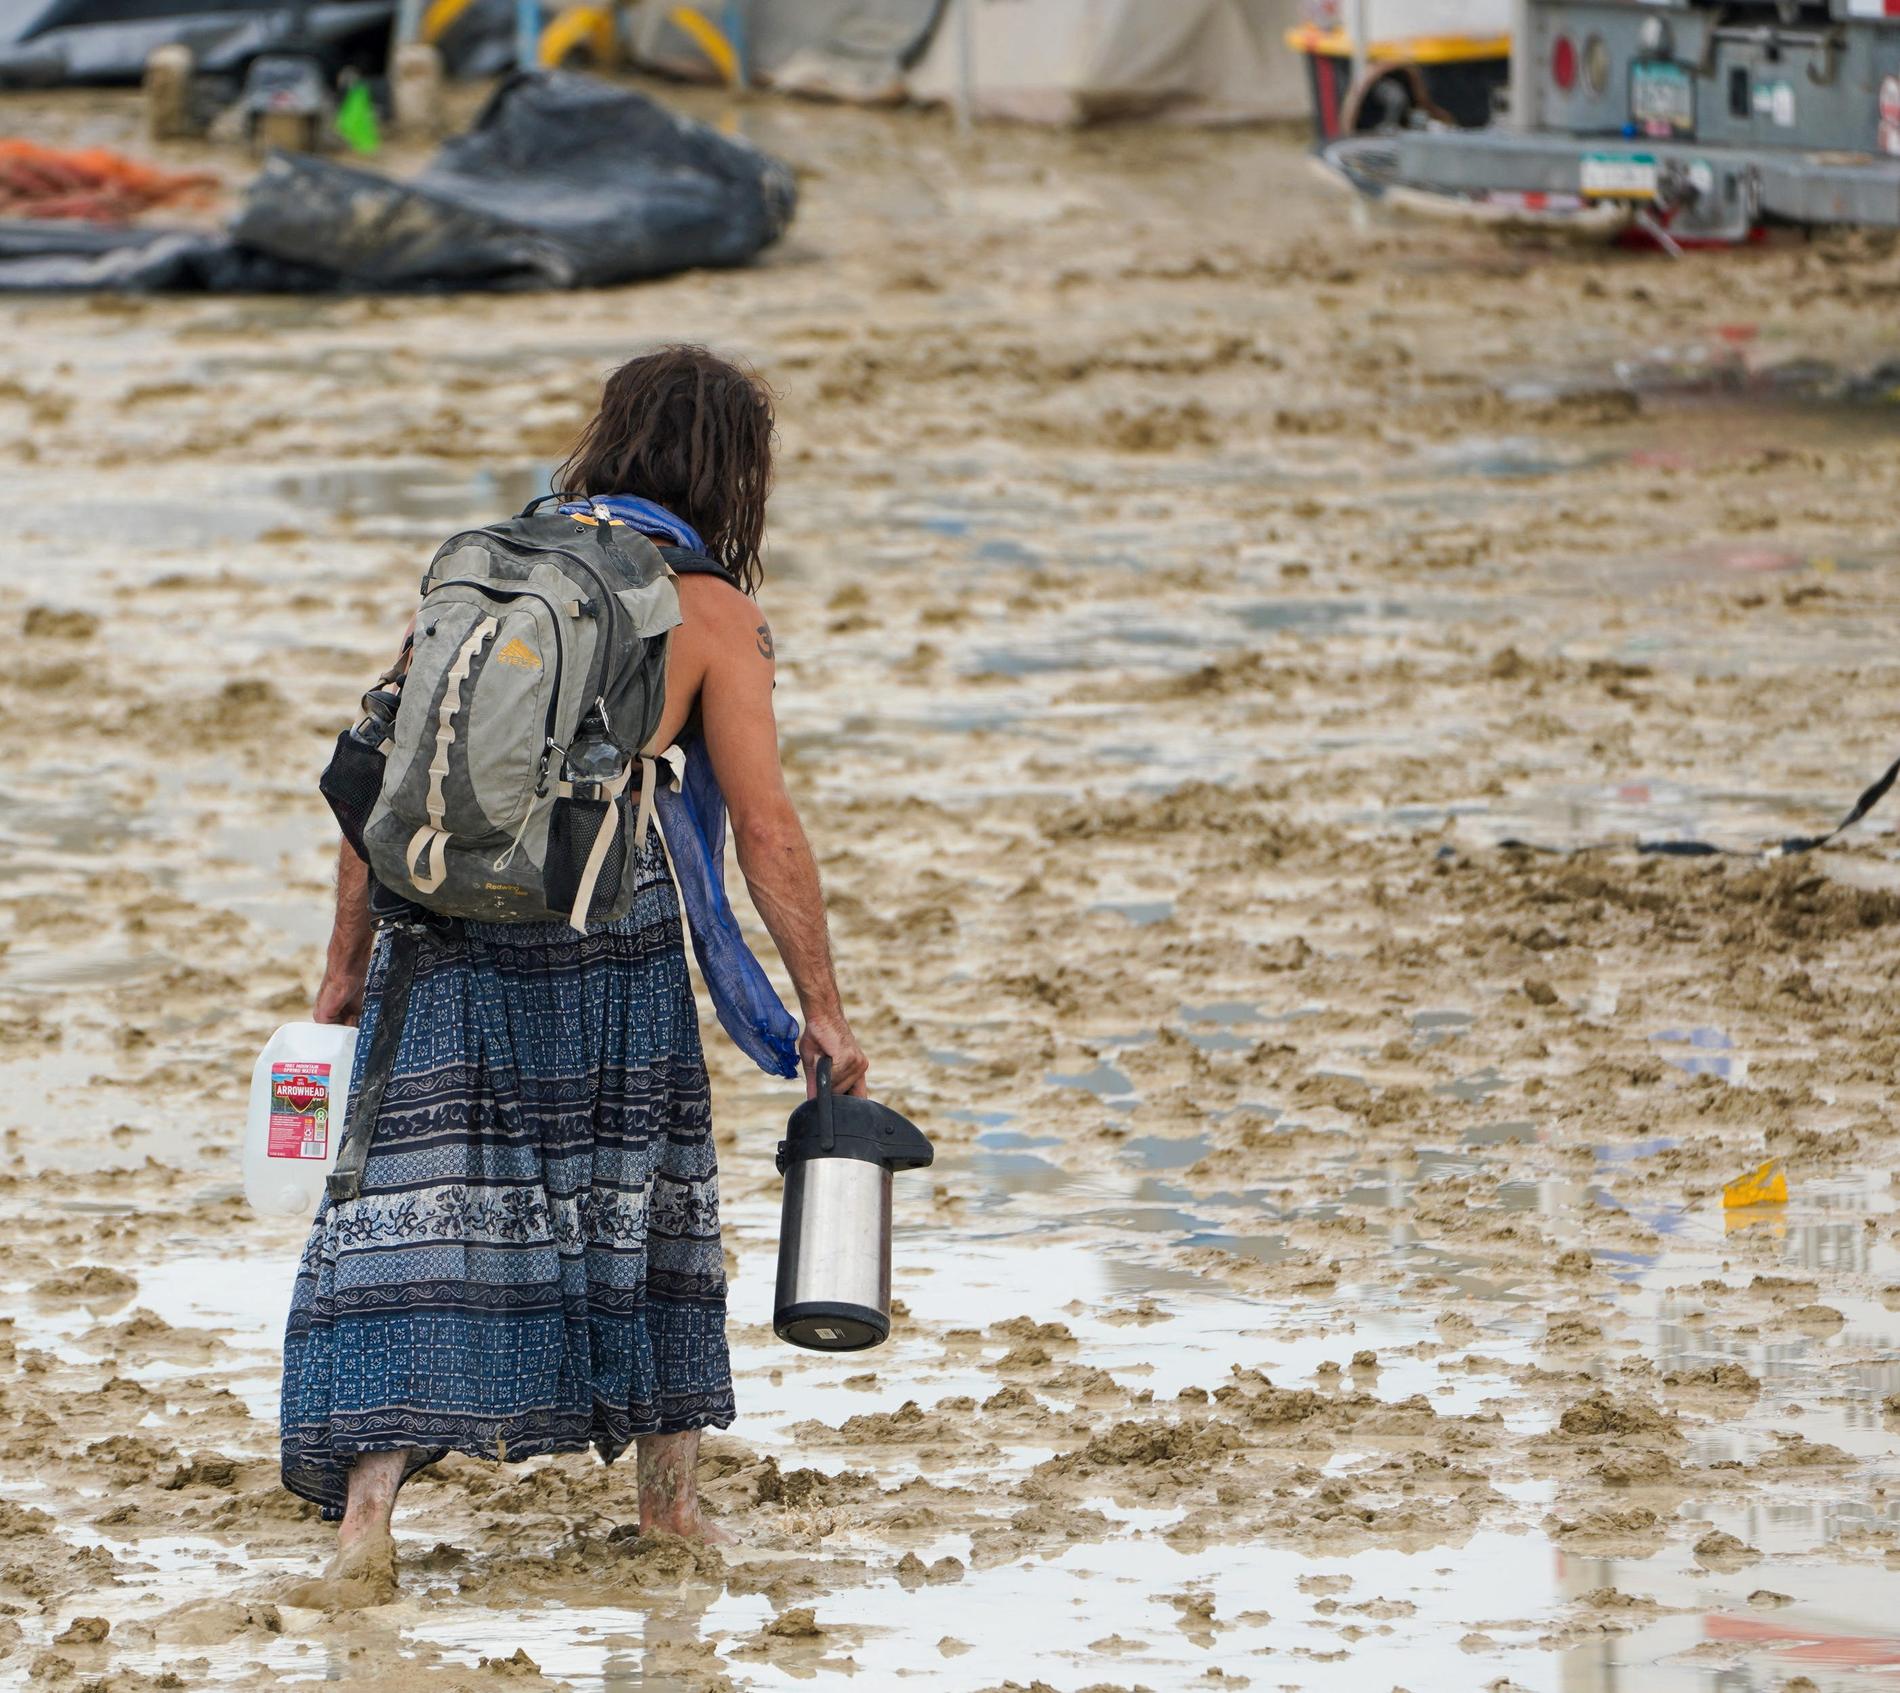 Festival Chaos: Thousands Trapped in Mud at Burning Man Festival